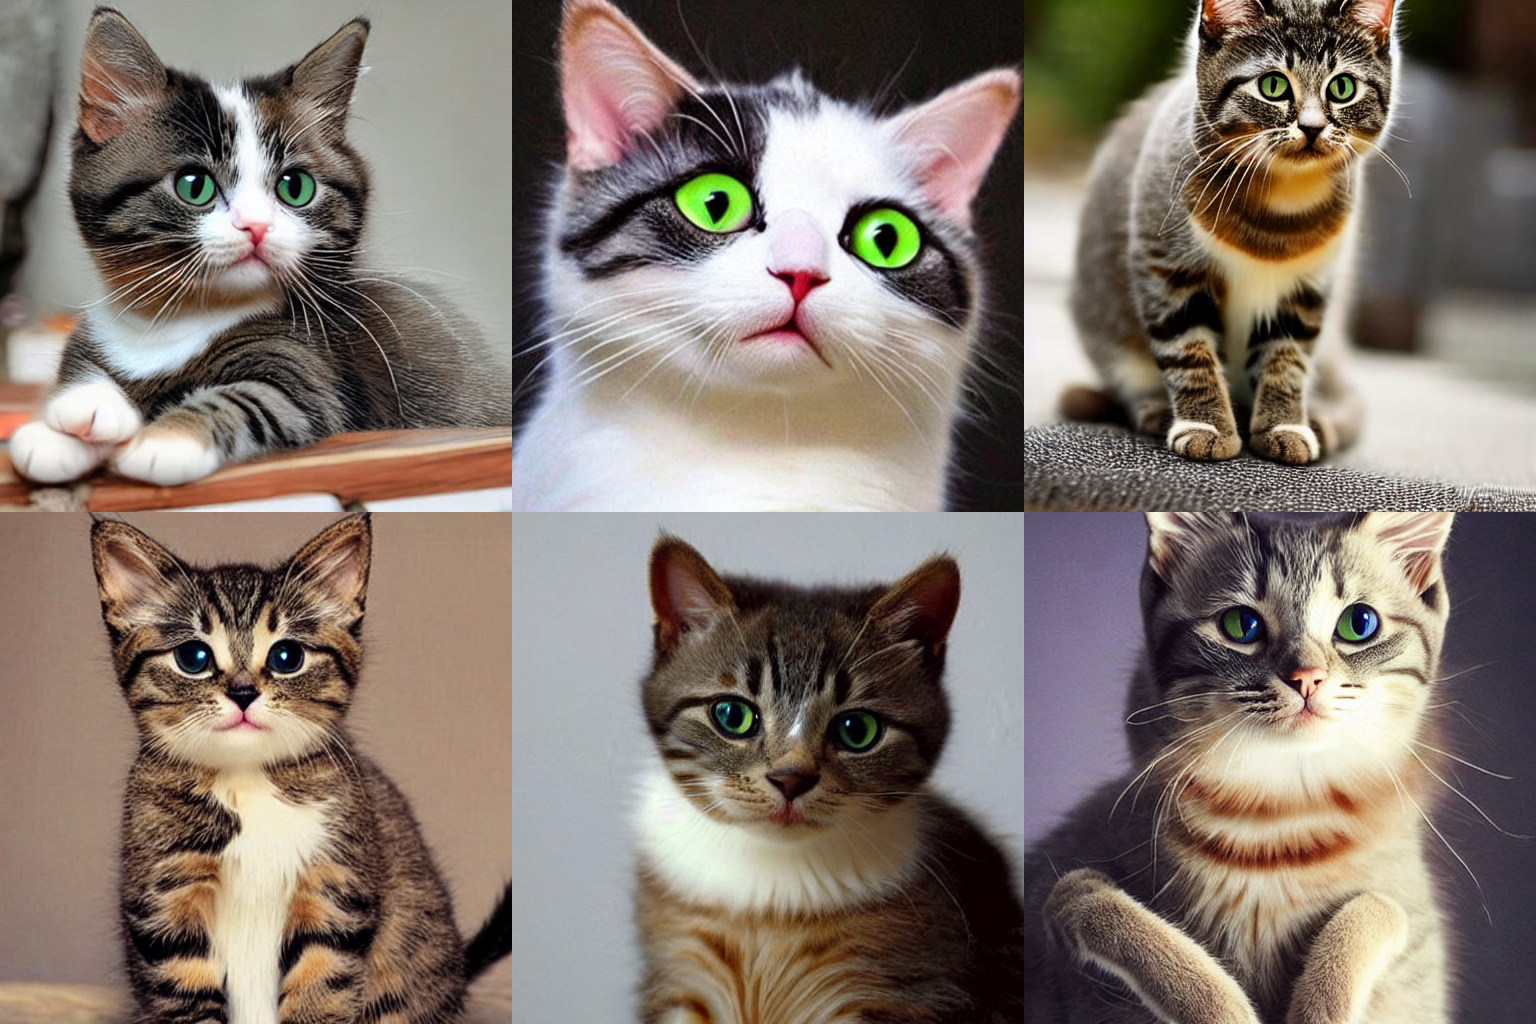 A panel of 6 output images from Stable Diffusion using the prompt &quot;Cute cat.&quot;